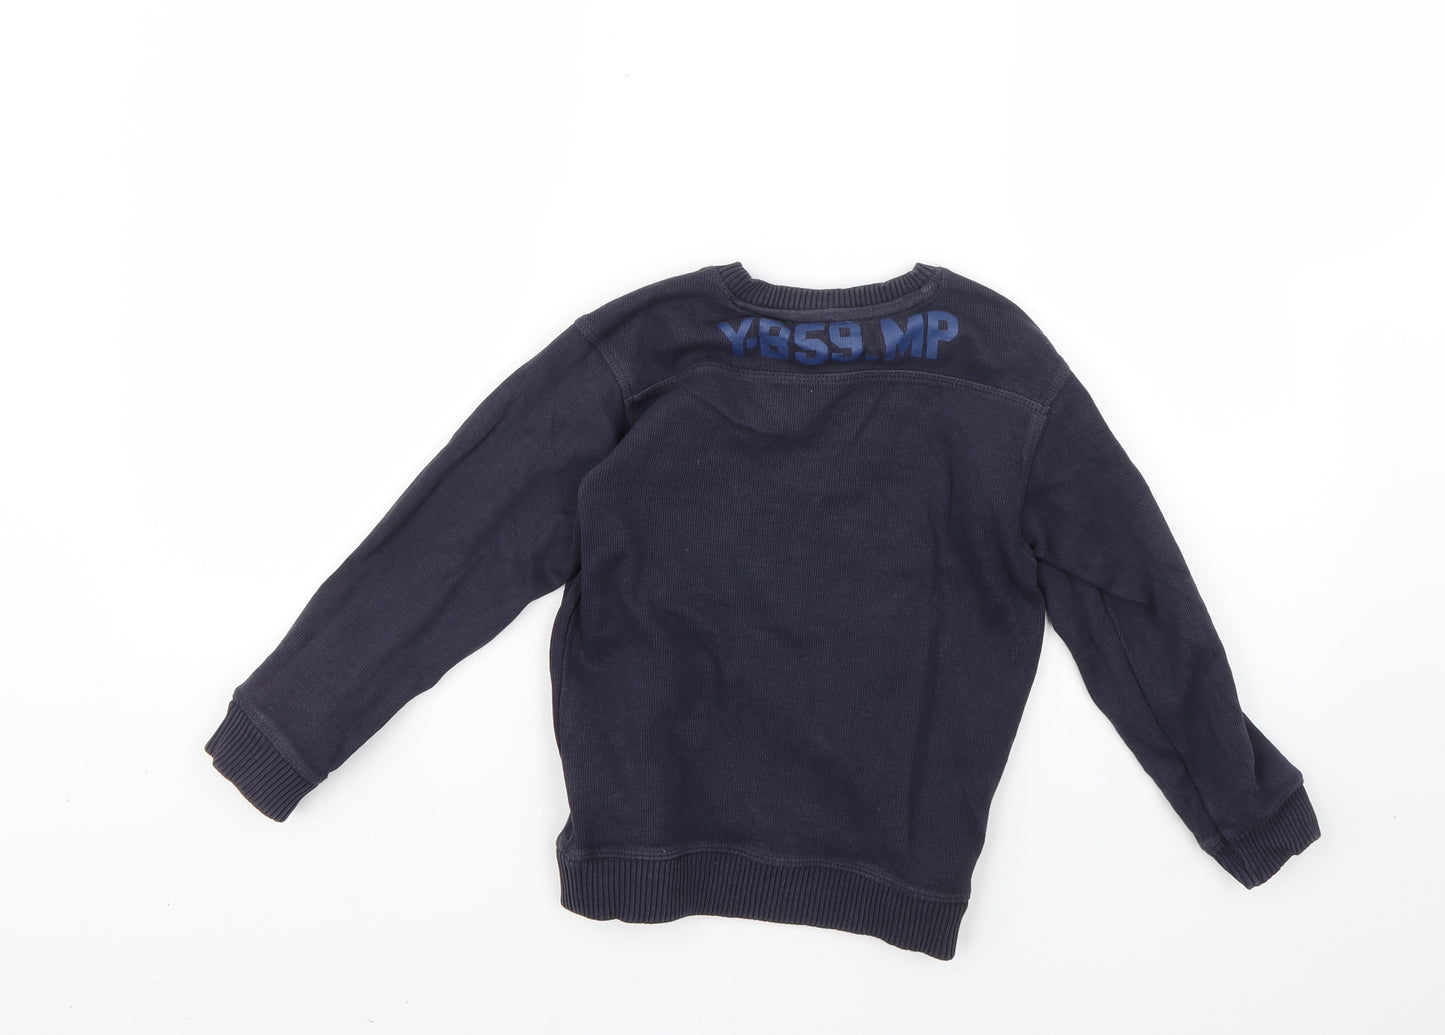 Matalan Boys Blue   Pullover Jumper Size 6-7 Years